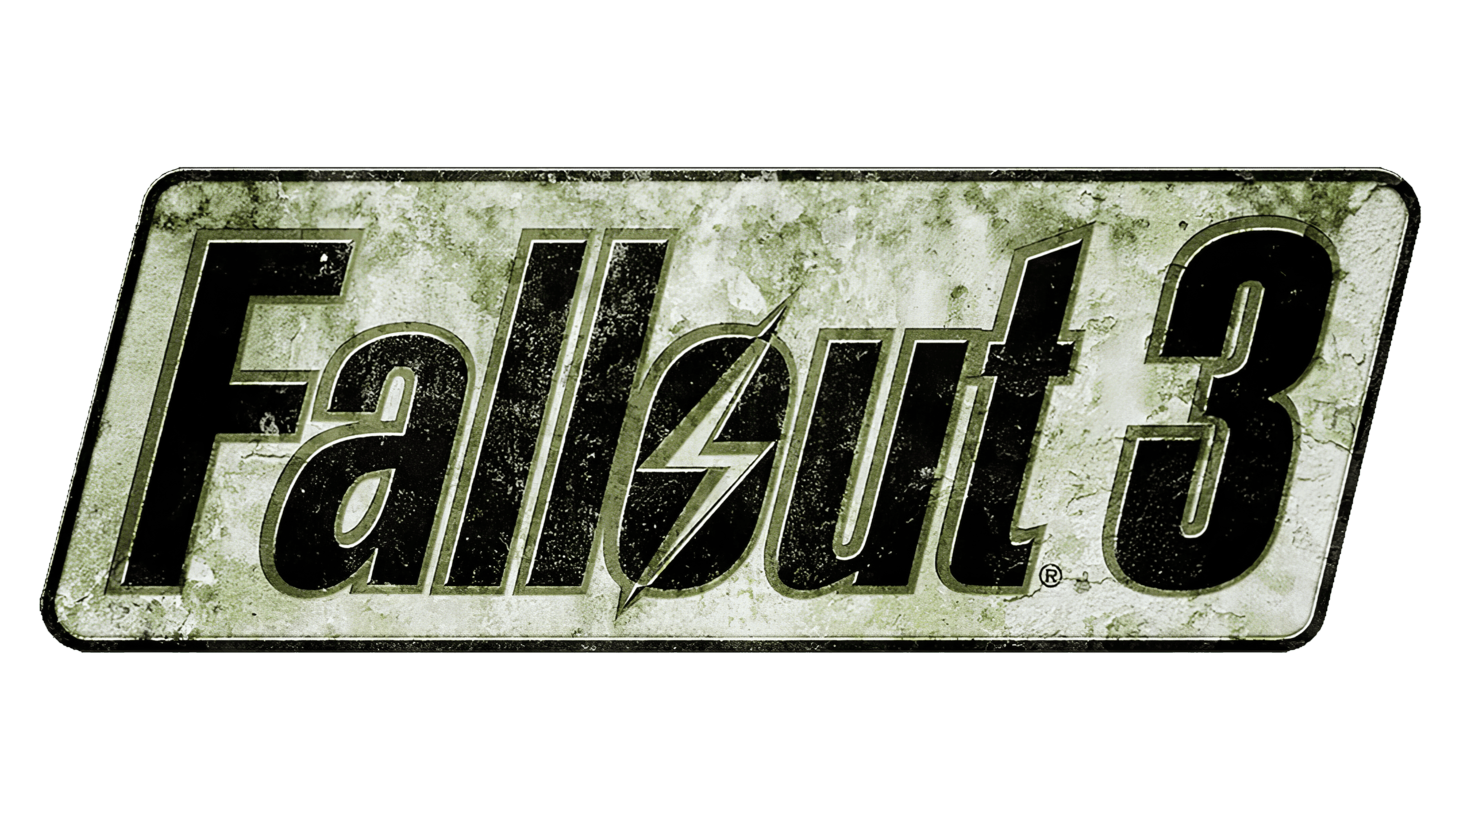 Fallout 3 sign 2008